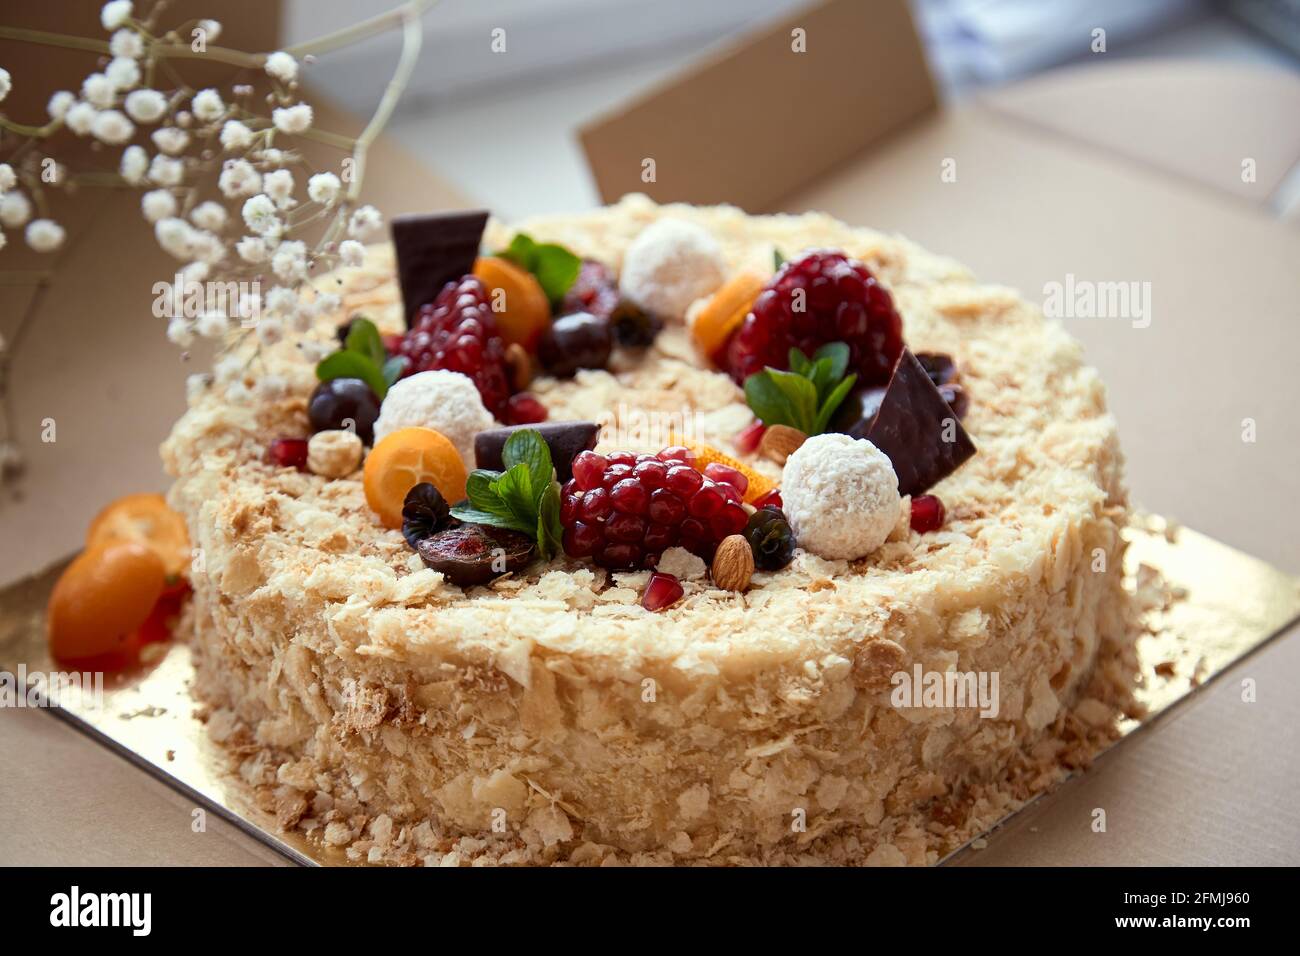 Birthday cake decorated with fruit, pomegranate seeds, chocolae and grapes in he box. Top view. High quality photo Stock Photo